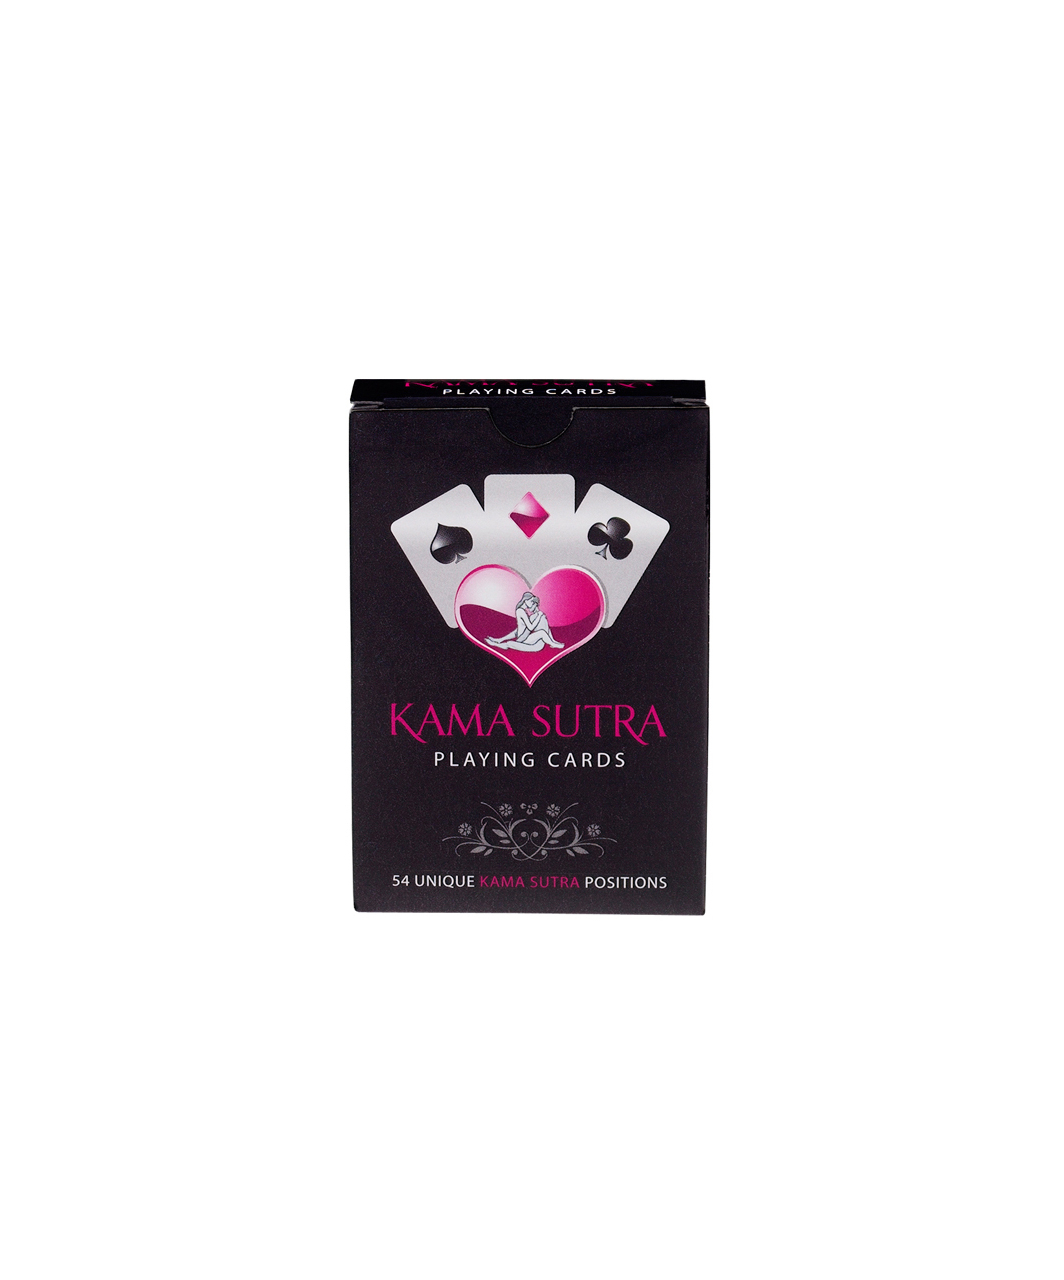 Tease & Please Kama Sutra Playing cards